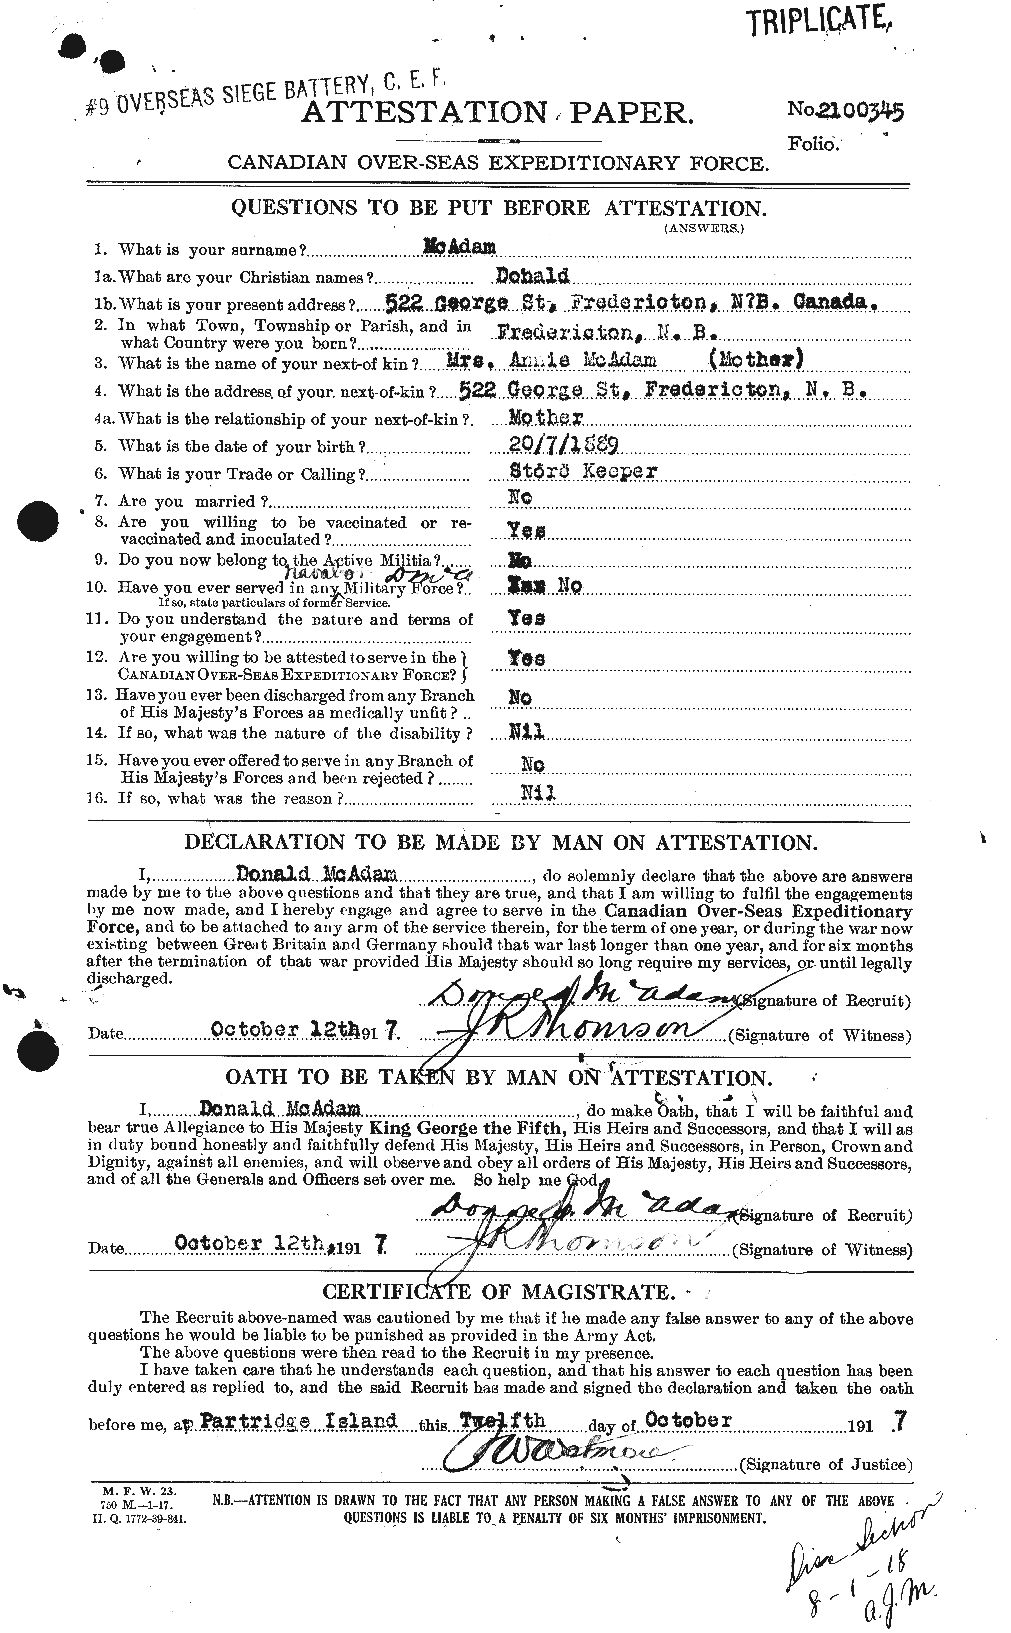 Personnel Records of the First World War - CEF 130461a